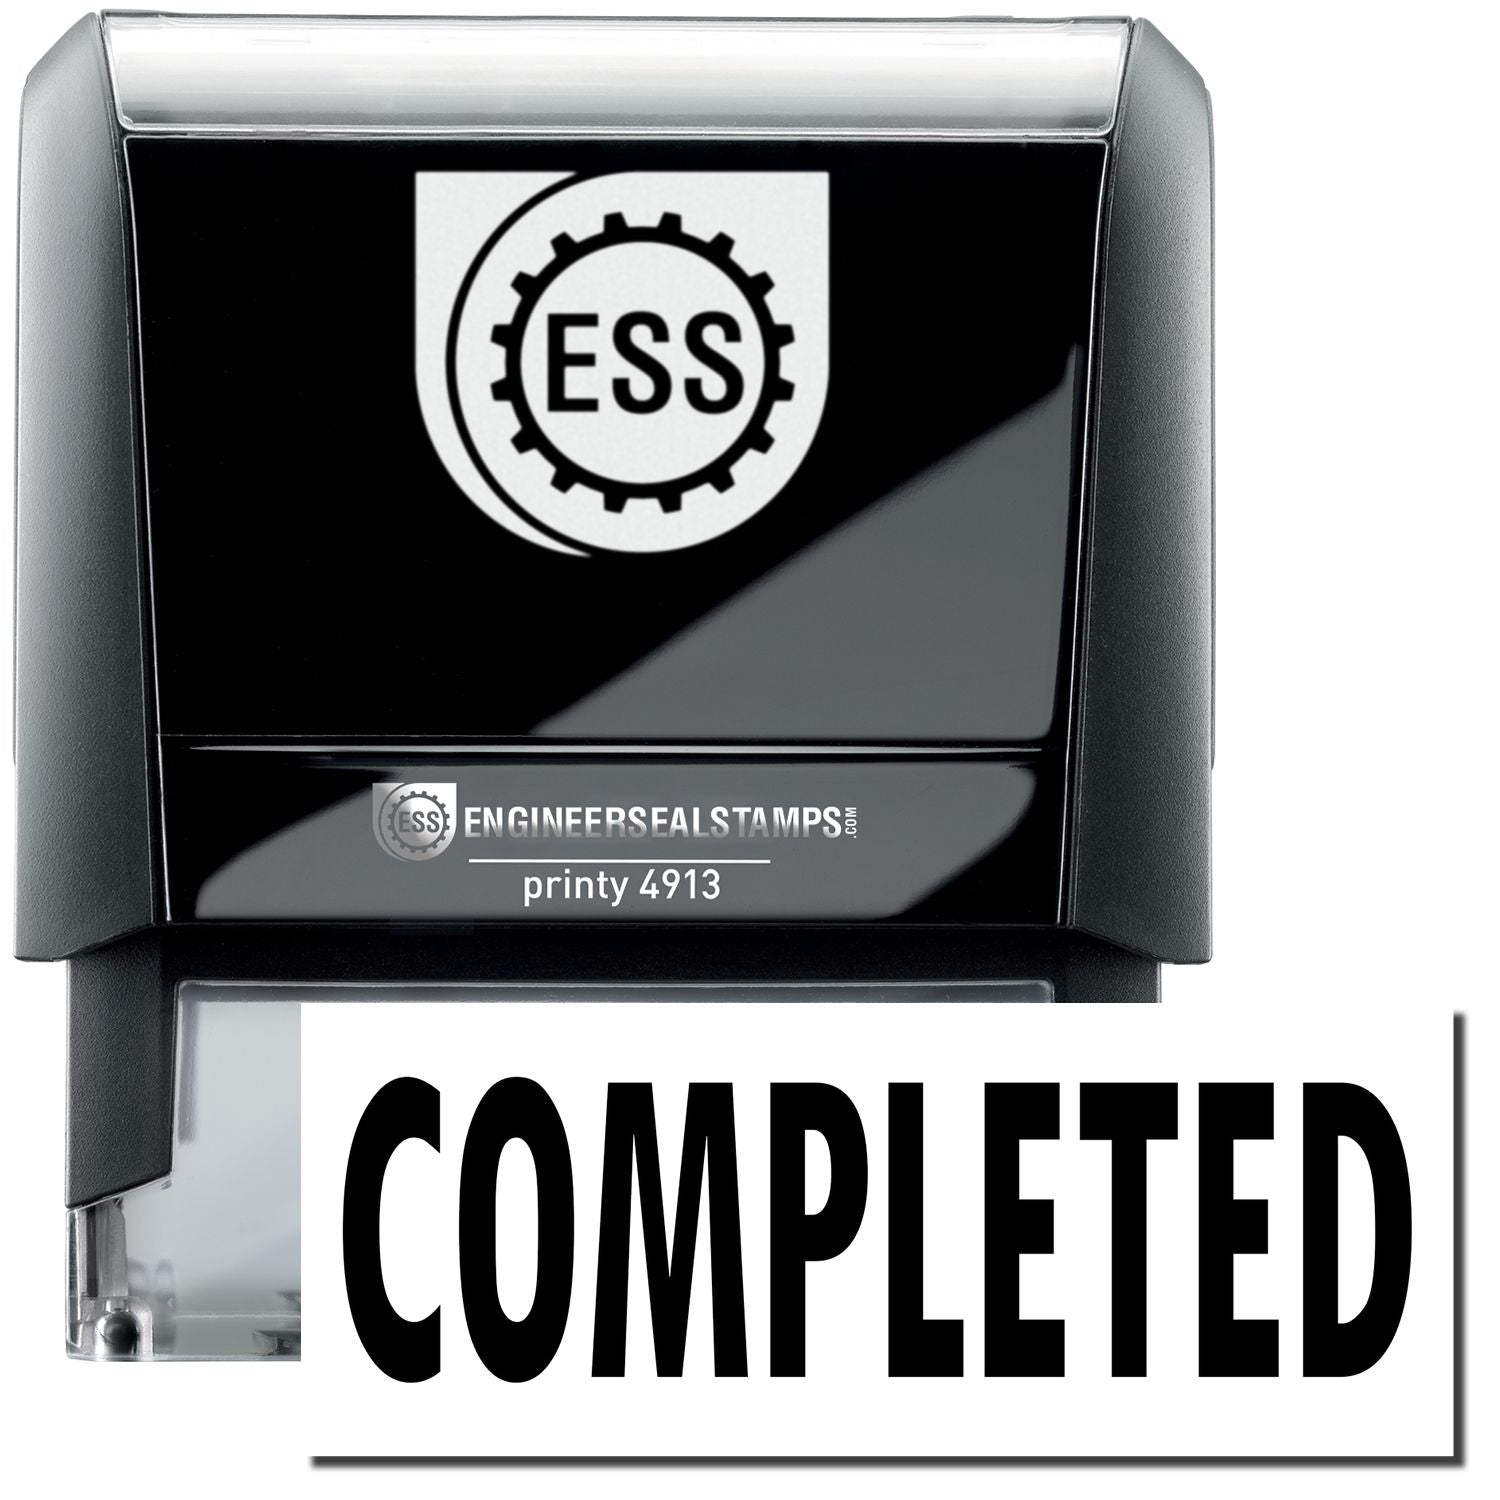 A large self-inking stamp with a stamped image showing how the text "COMPLETED" in a large bold font is displayed by it.